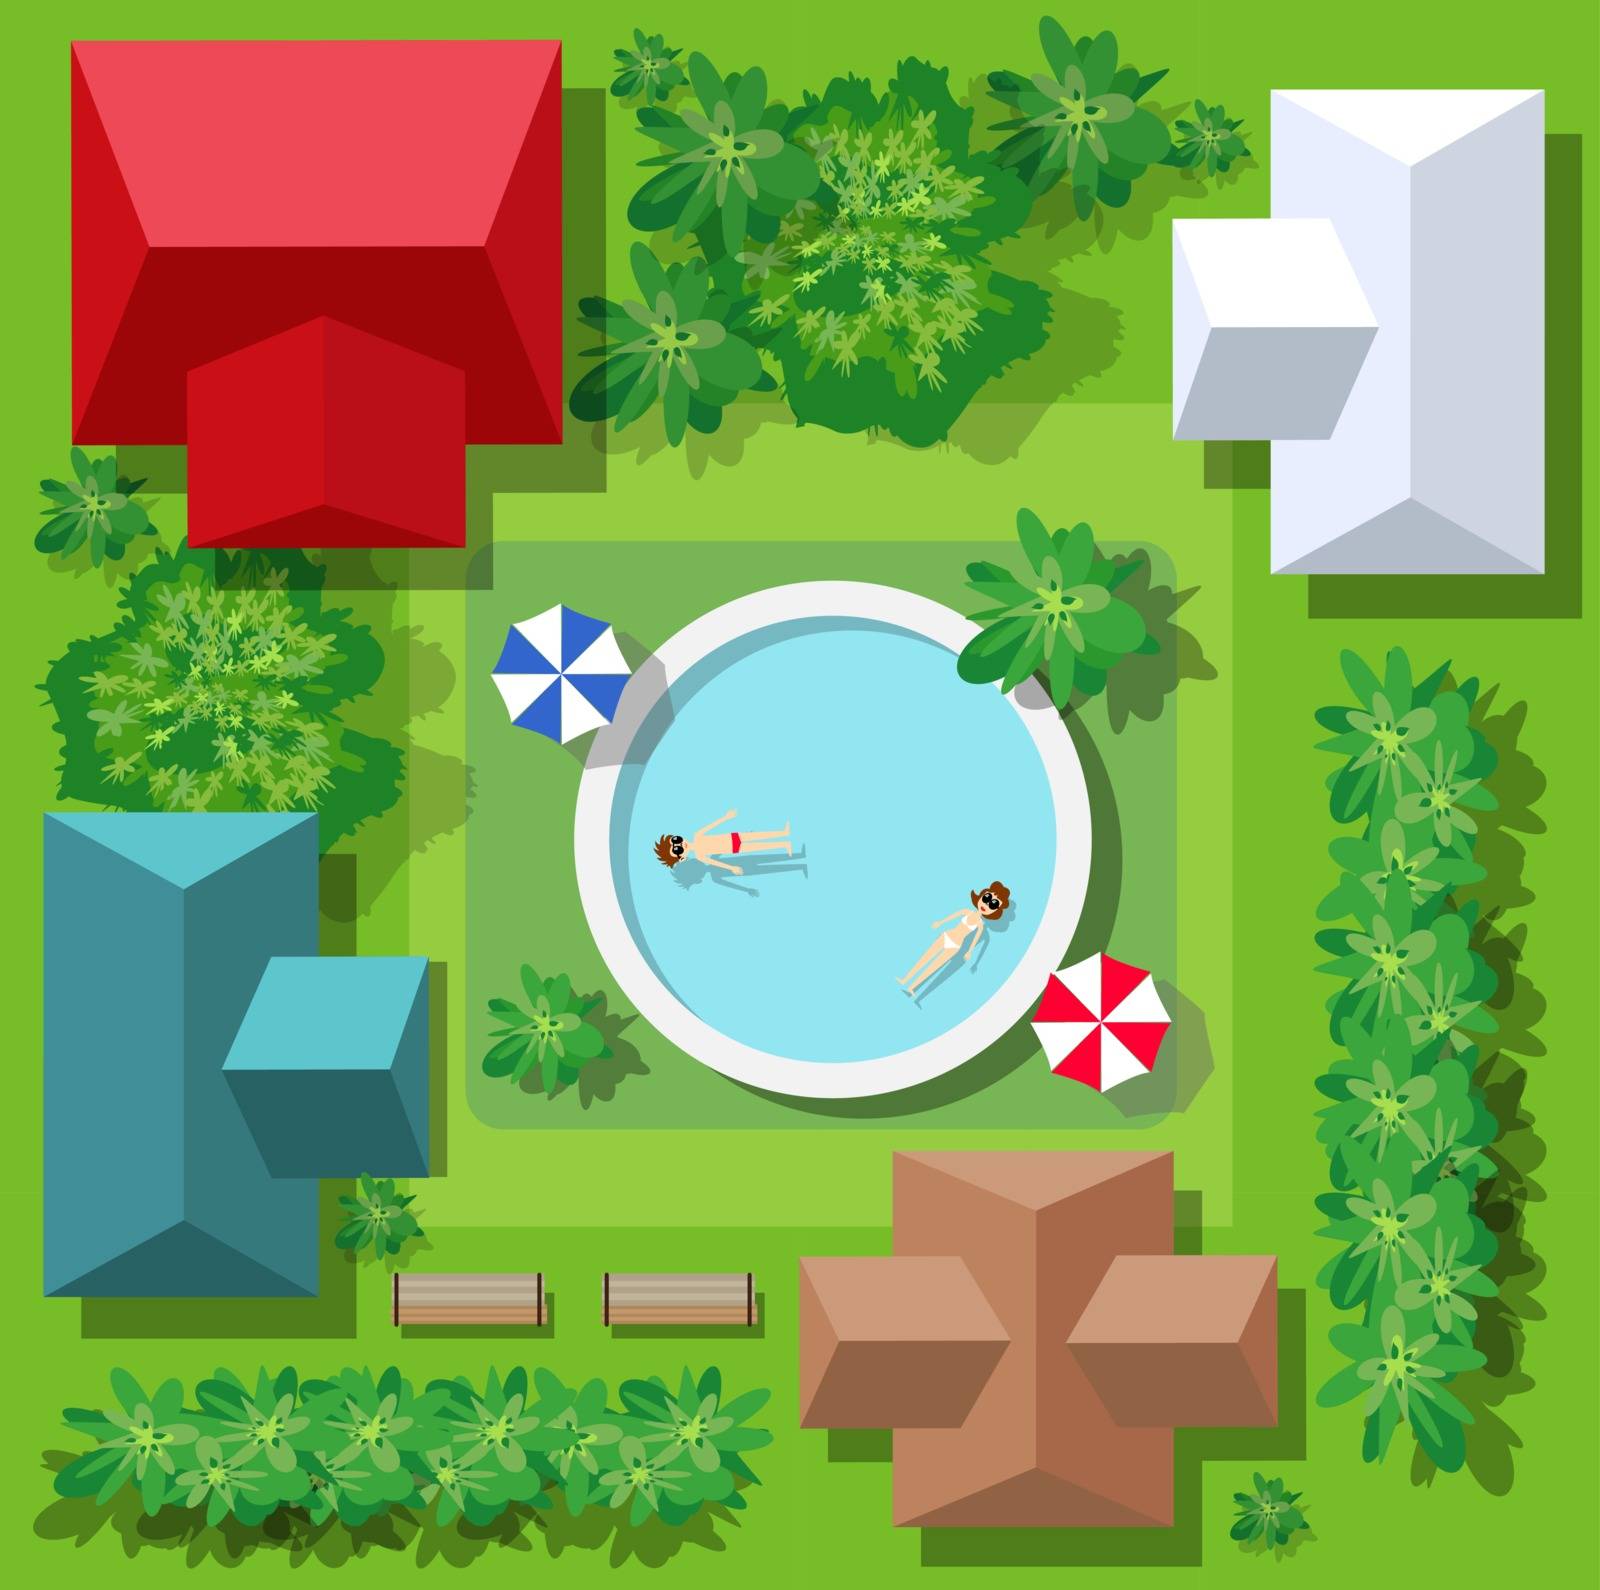 Top view of the swimming pool by Alexzel